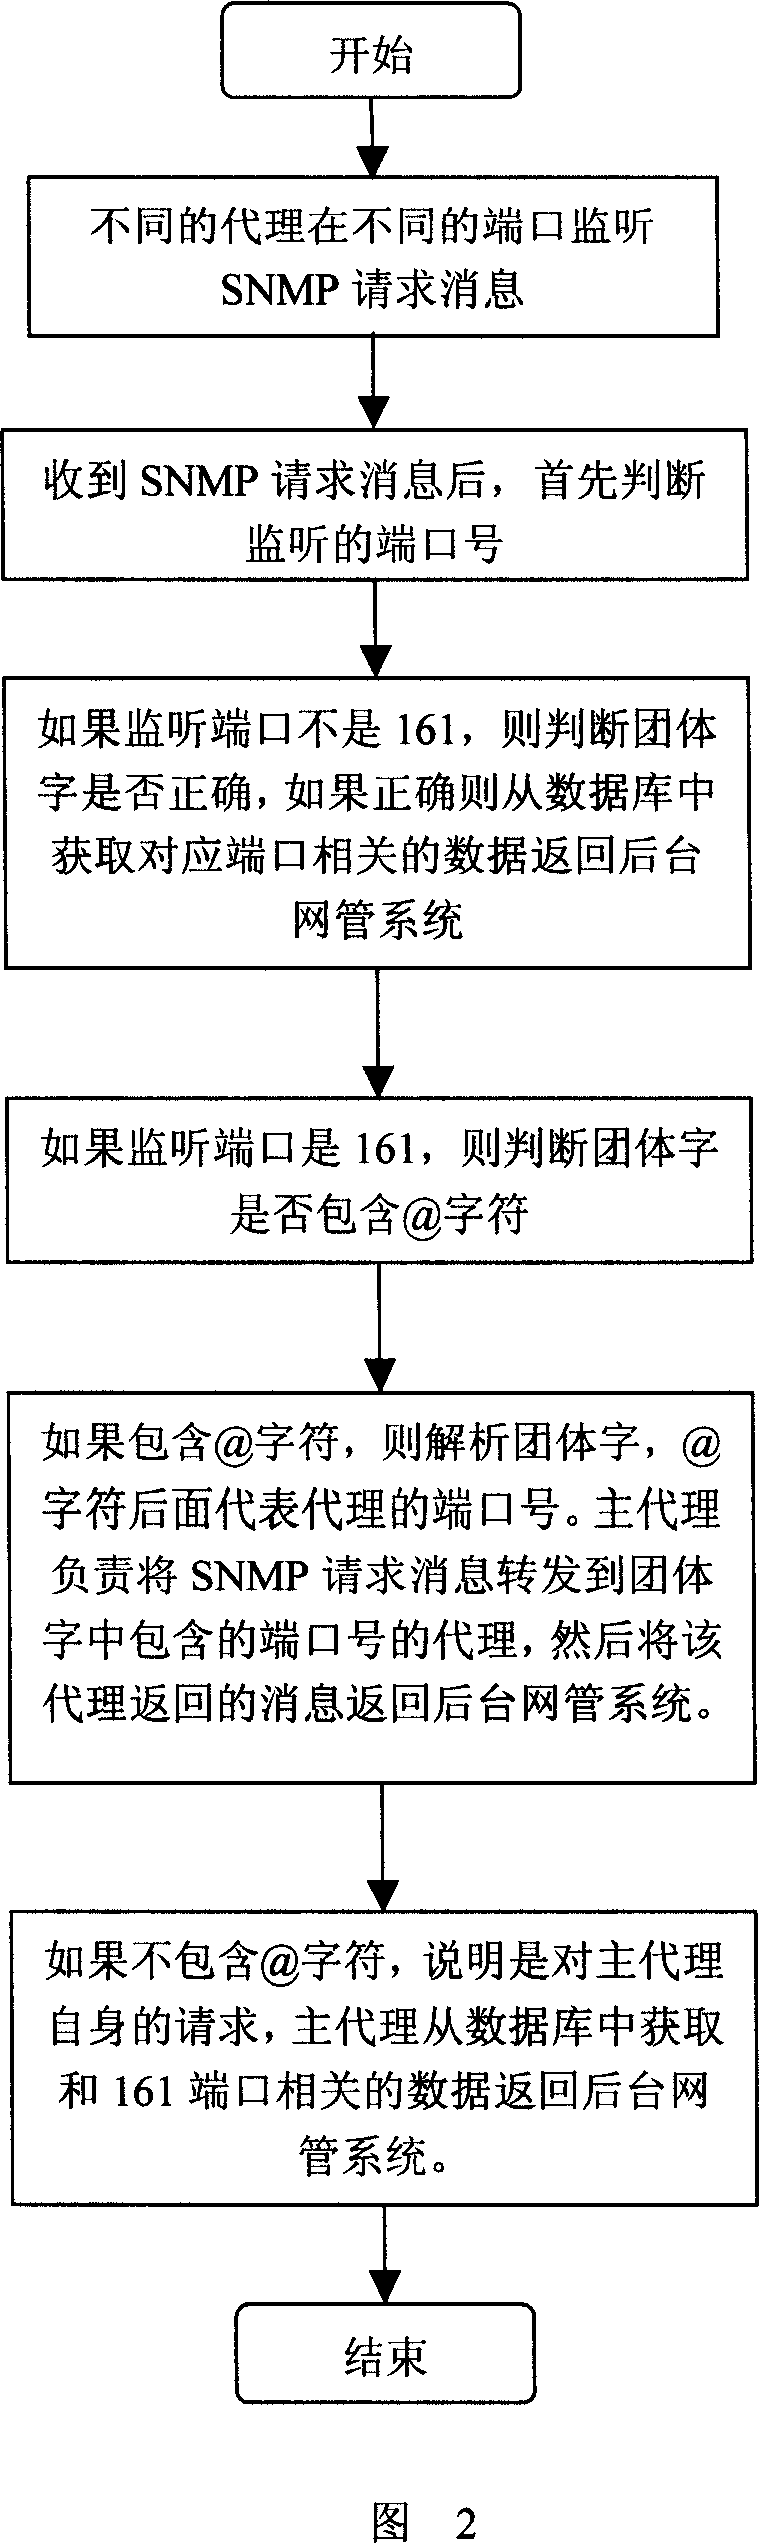 Method of simulating SNMP network element and performing network management system test with the network element